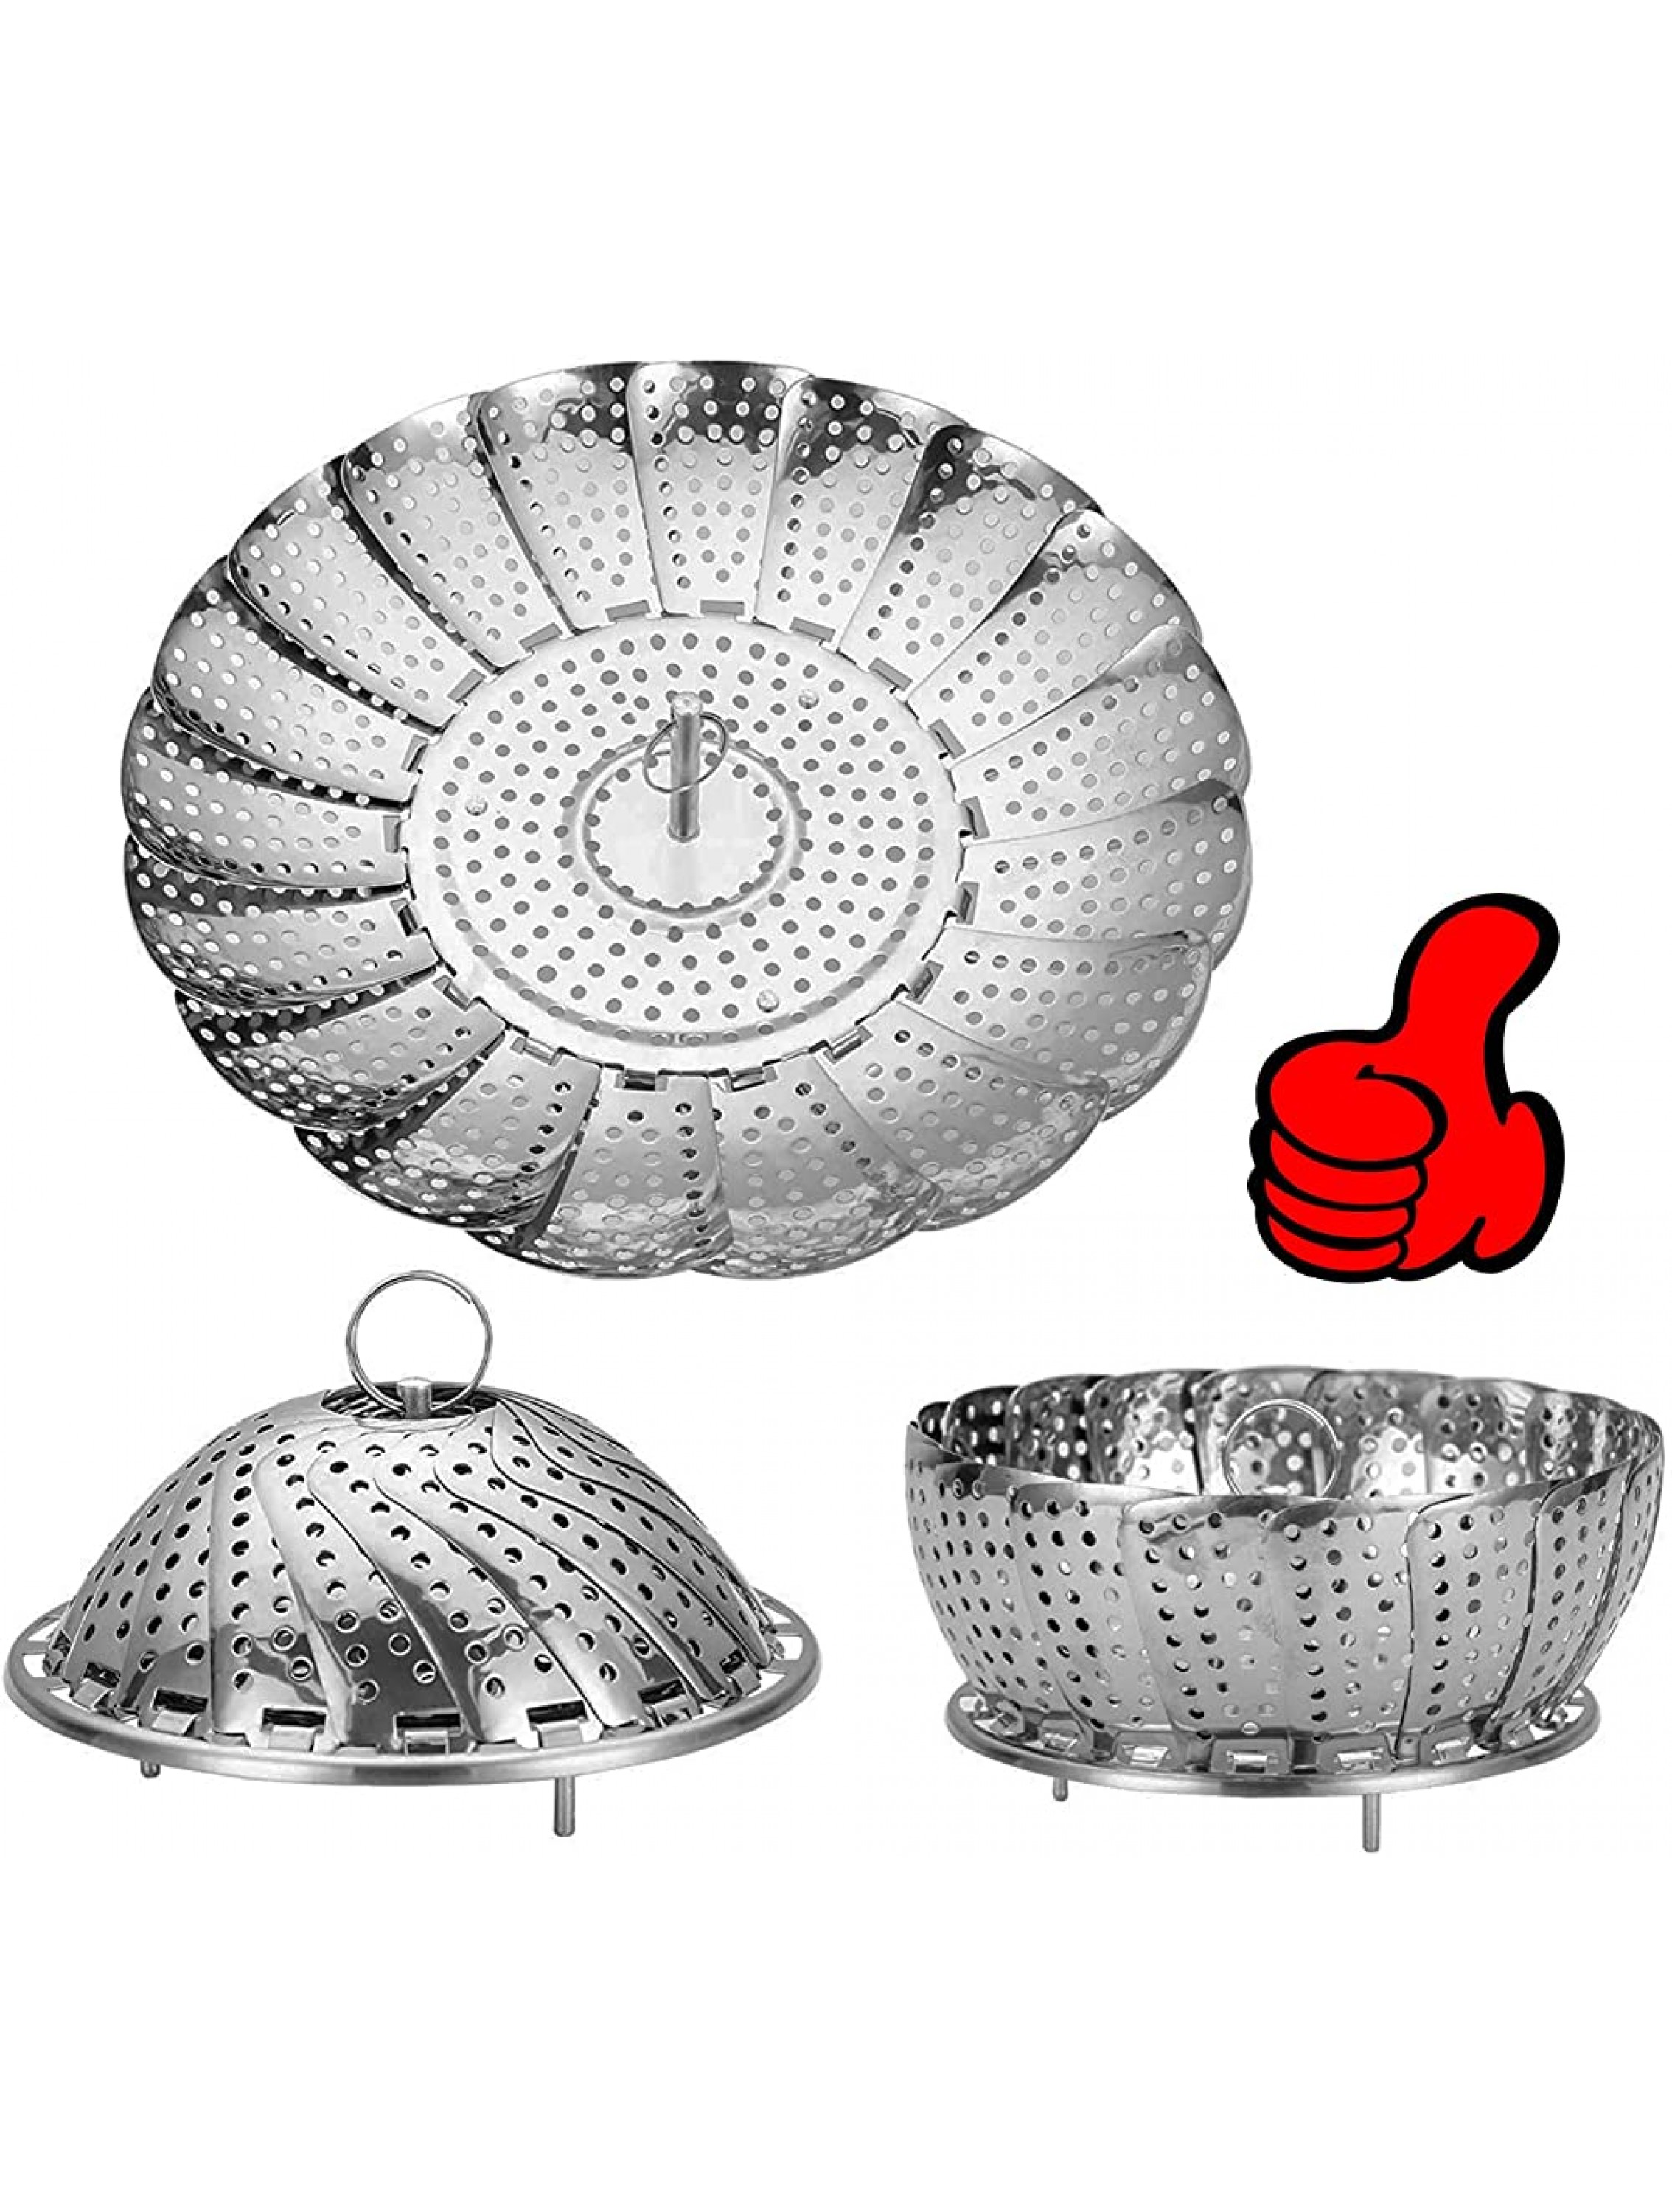 Vegetable Steamer Basket Stainless Steel Folding Steamer Basket Insert for Veggie Fish Seafood Cooking 100% Stainless Steel Steamer Insert expandable to Fit Various Size Pot6 to 10.5 - BDY1IXFUR